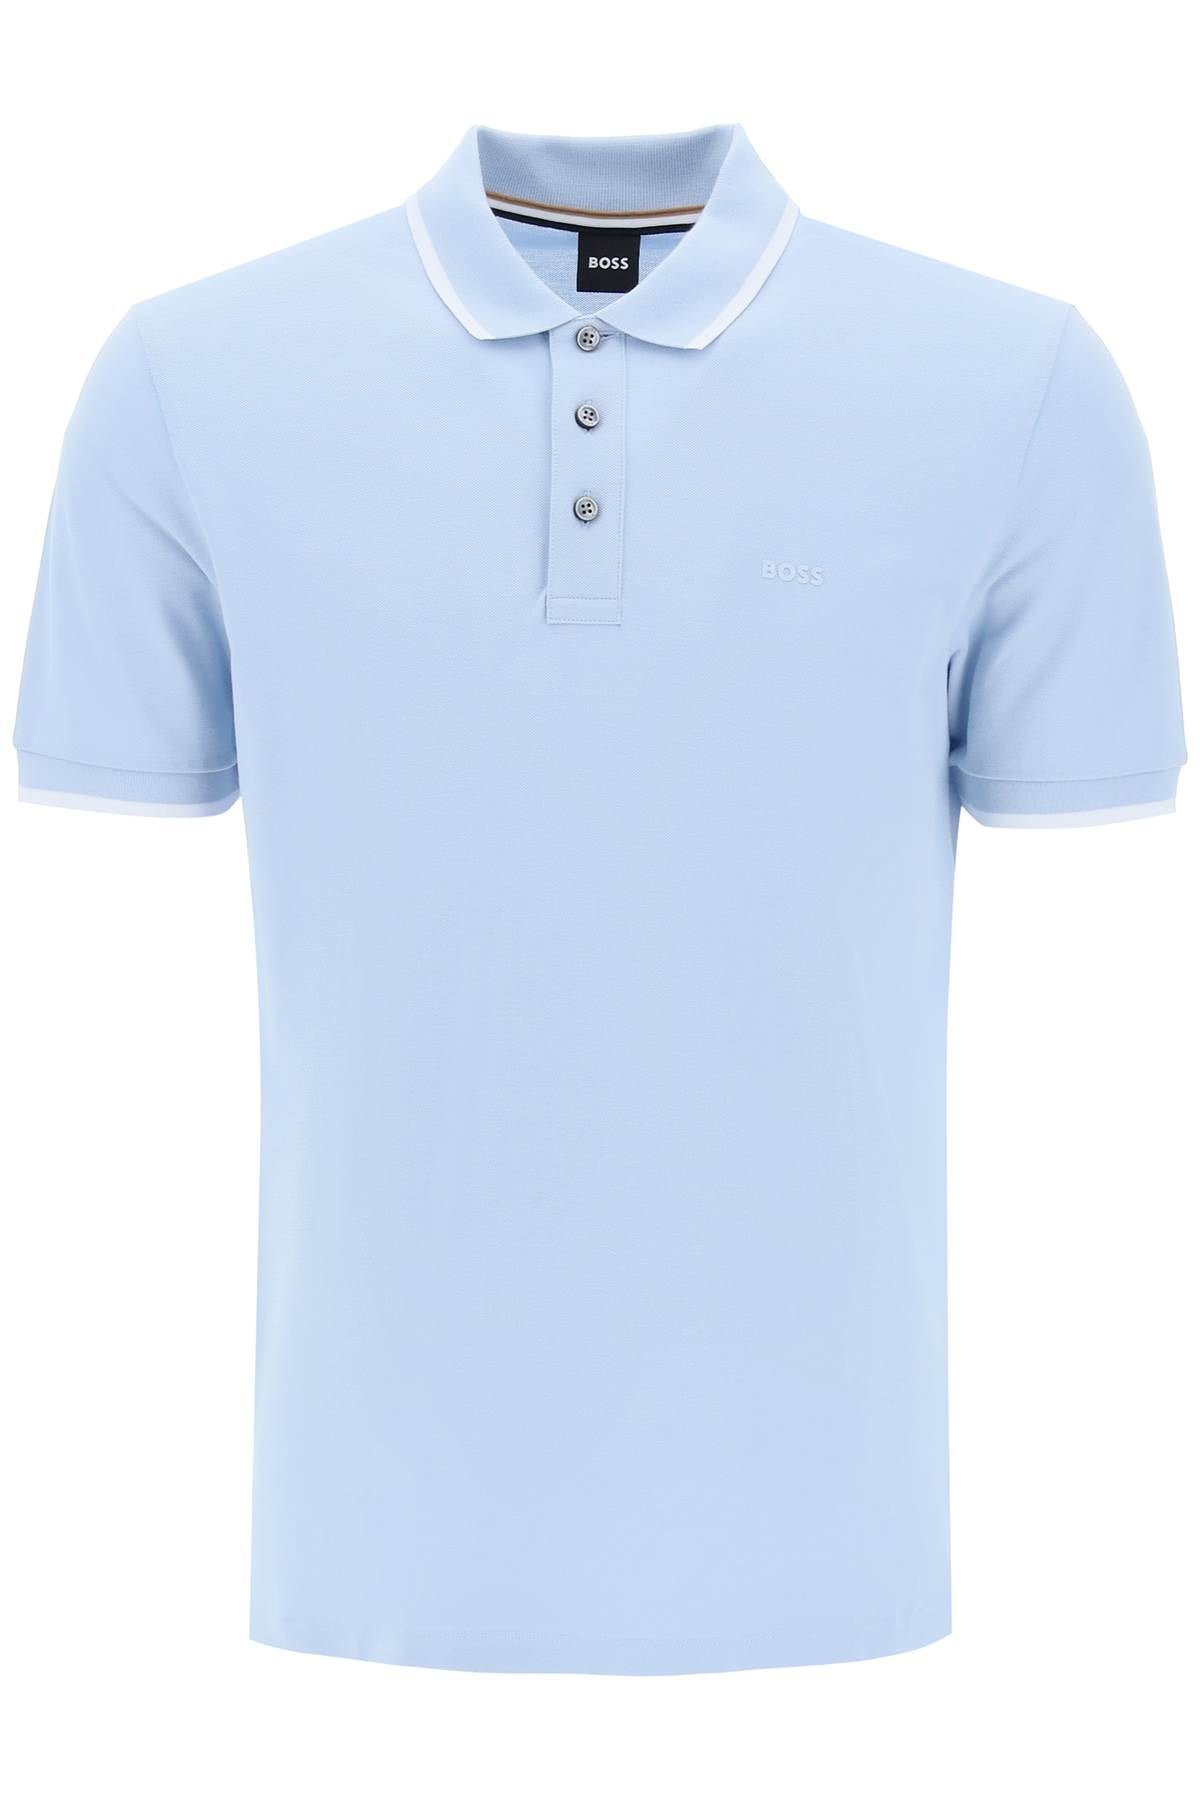 Boss polo shirt with contrasting edges-0